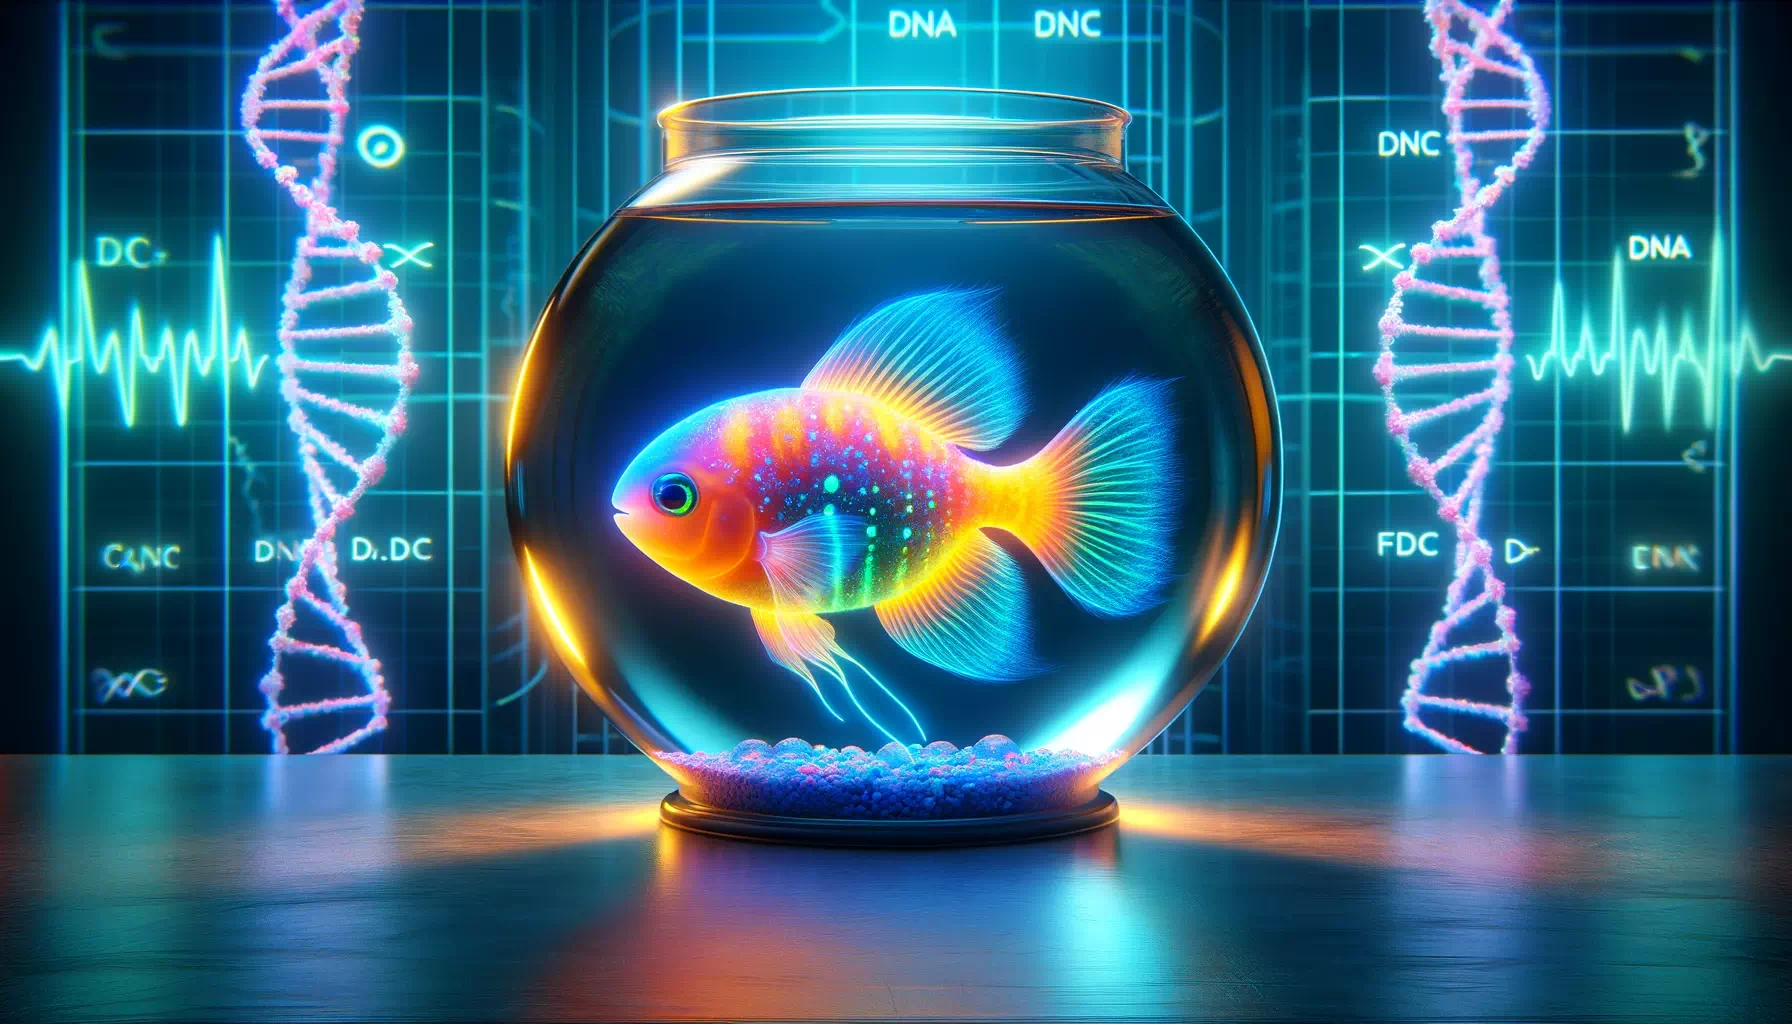 GloFish in an aquarium, focusing on the glowing aspect. The fish radiates a vibrant, neon glow. DNA strands and genetic symbols ar